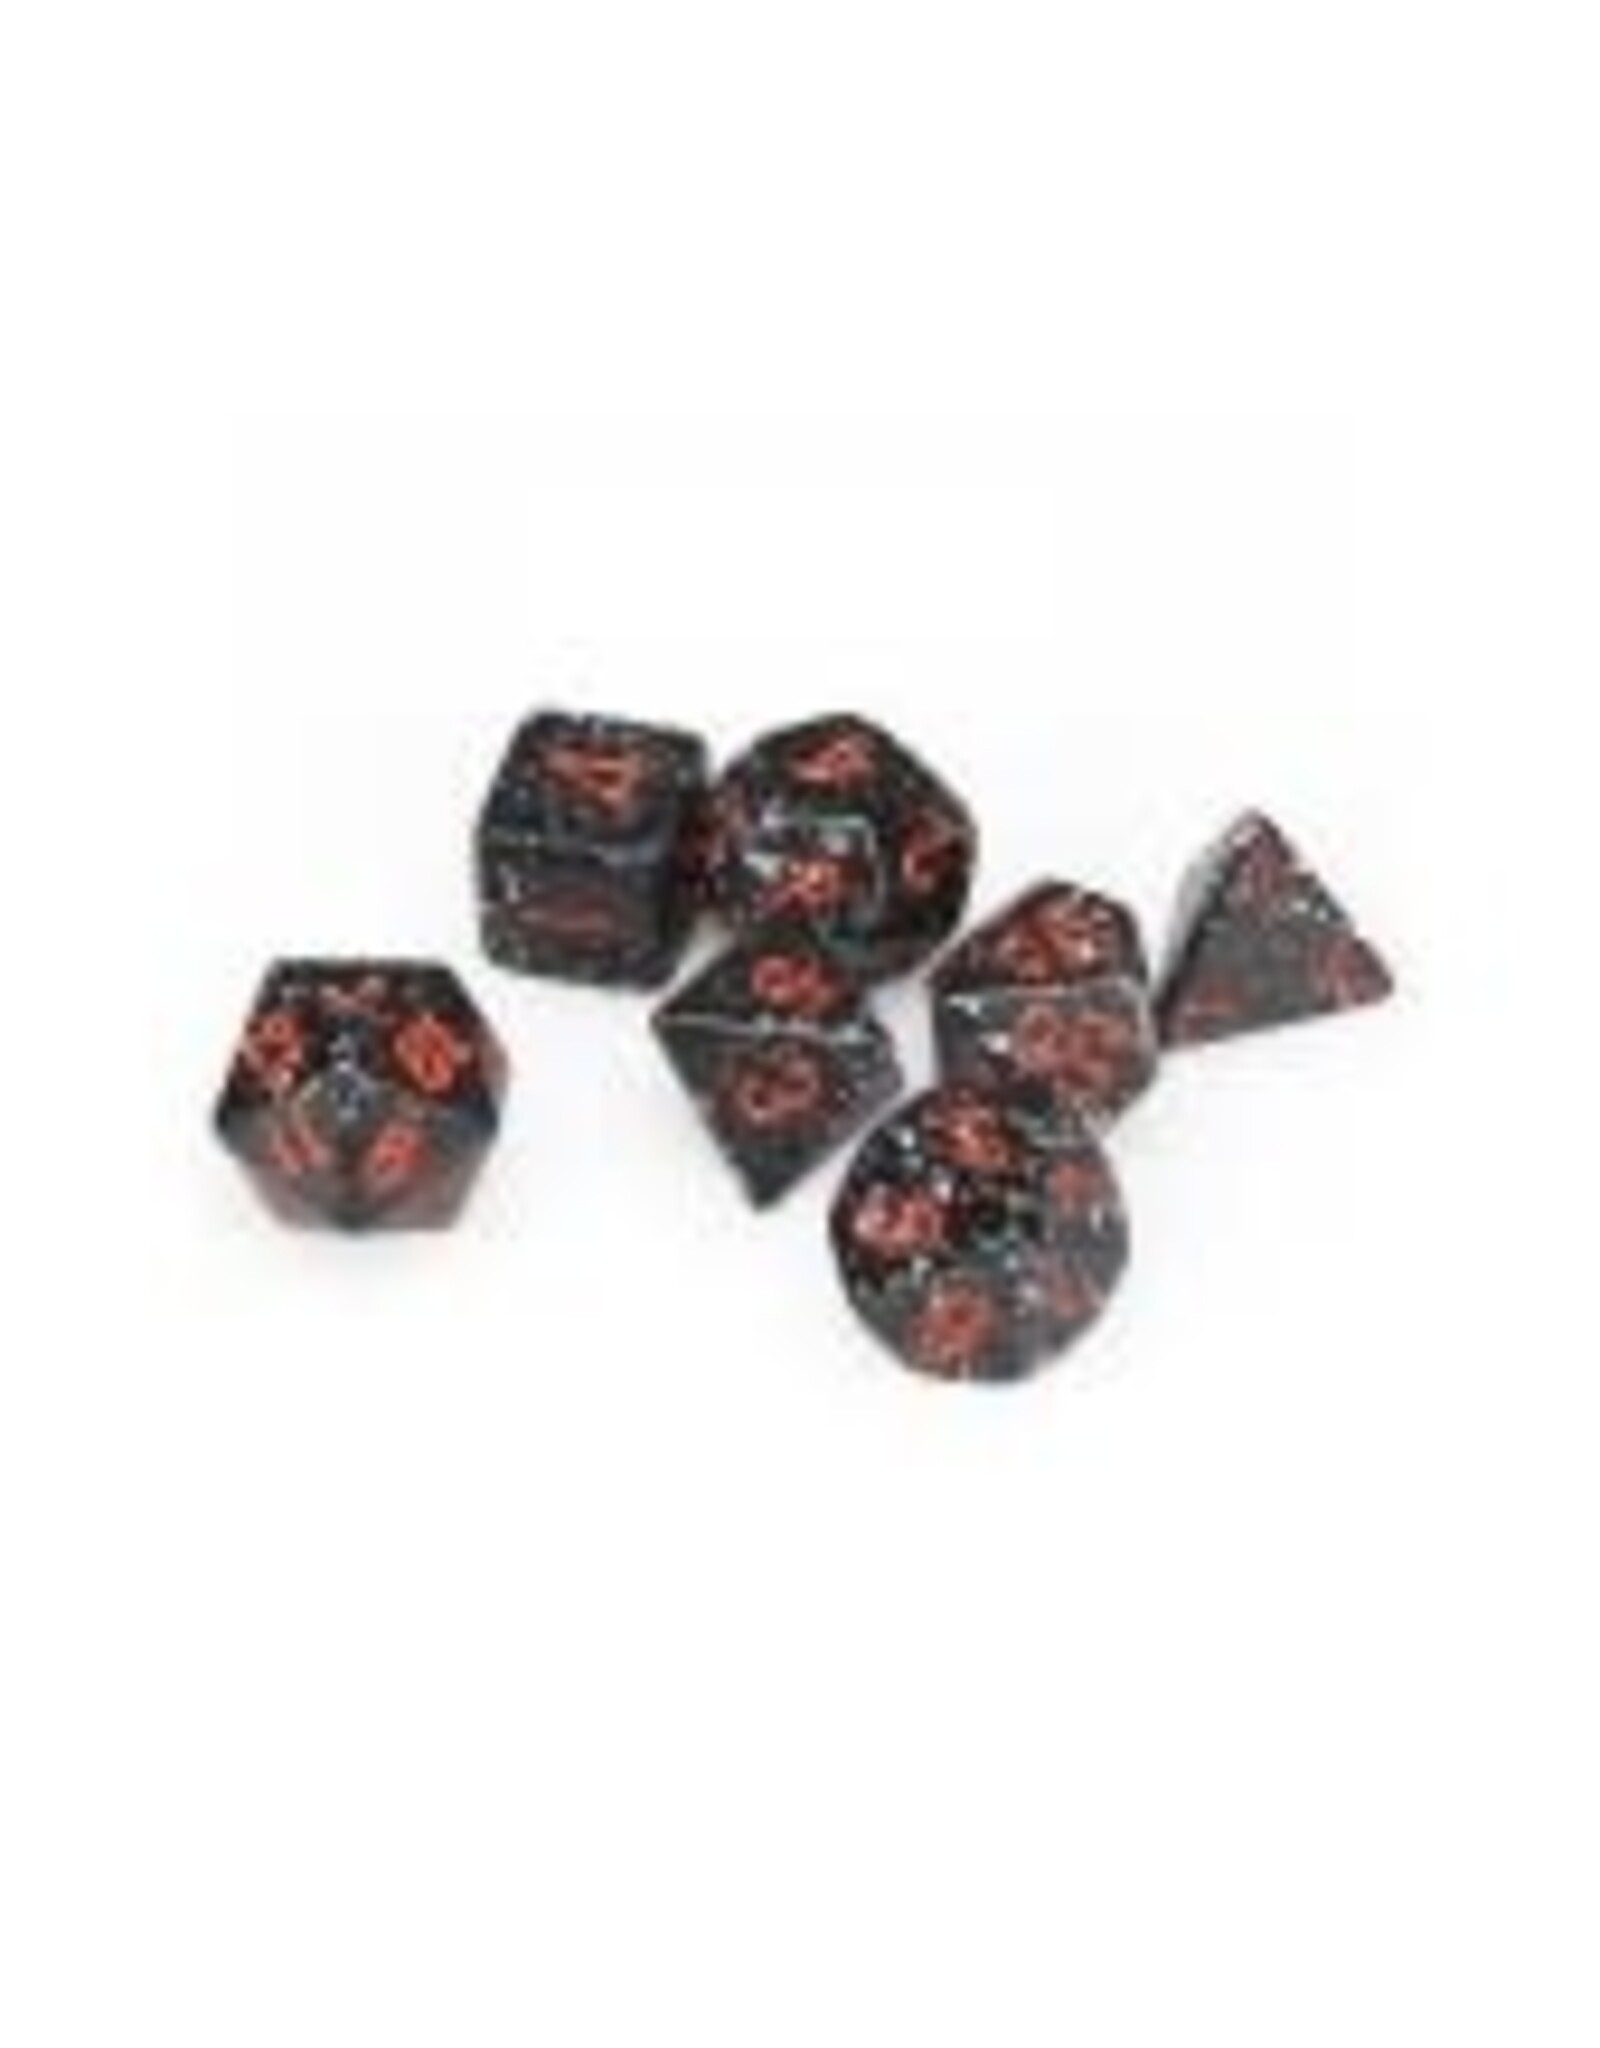 Chessex Space Speckled Poly 7 dice set